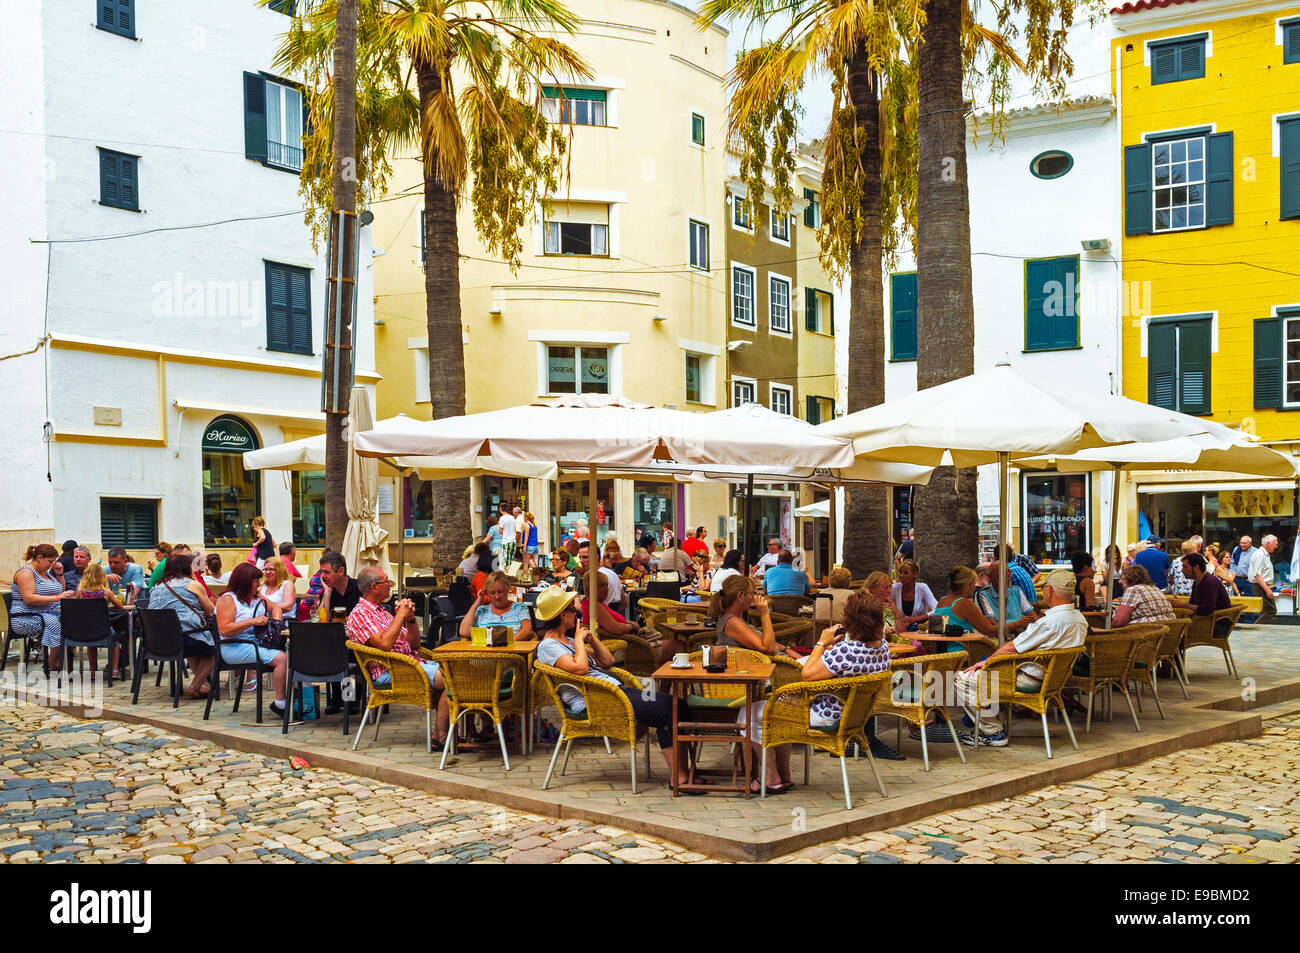 Outdoor cafe and restaurant in Plaza Colon in the old town Mahon, Menorca, Balearic, Spain Stock Photo